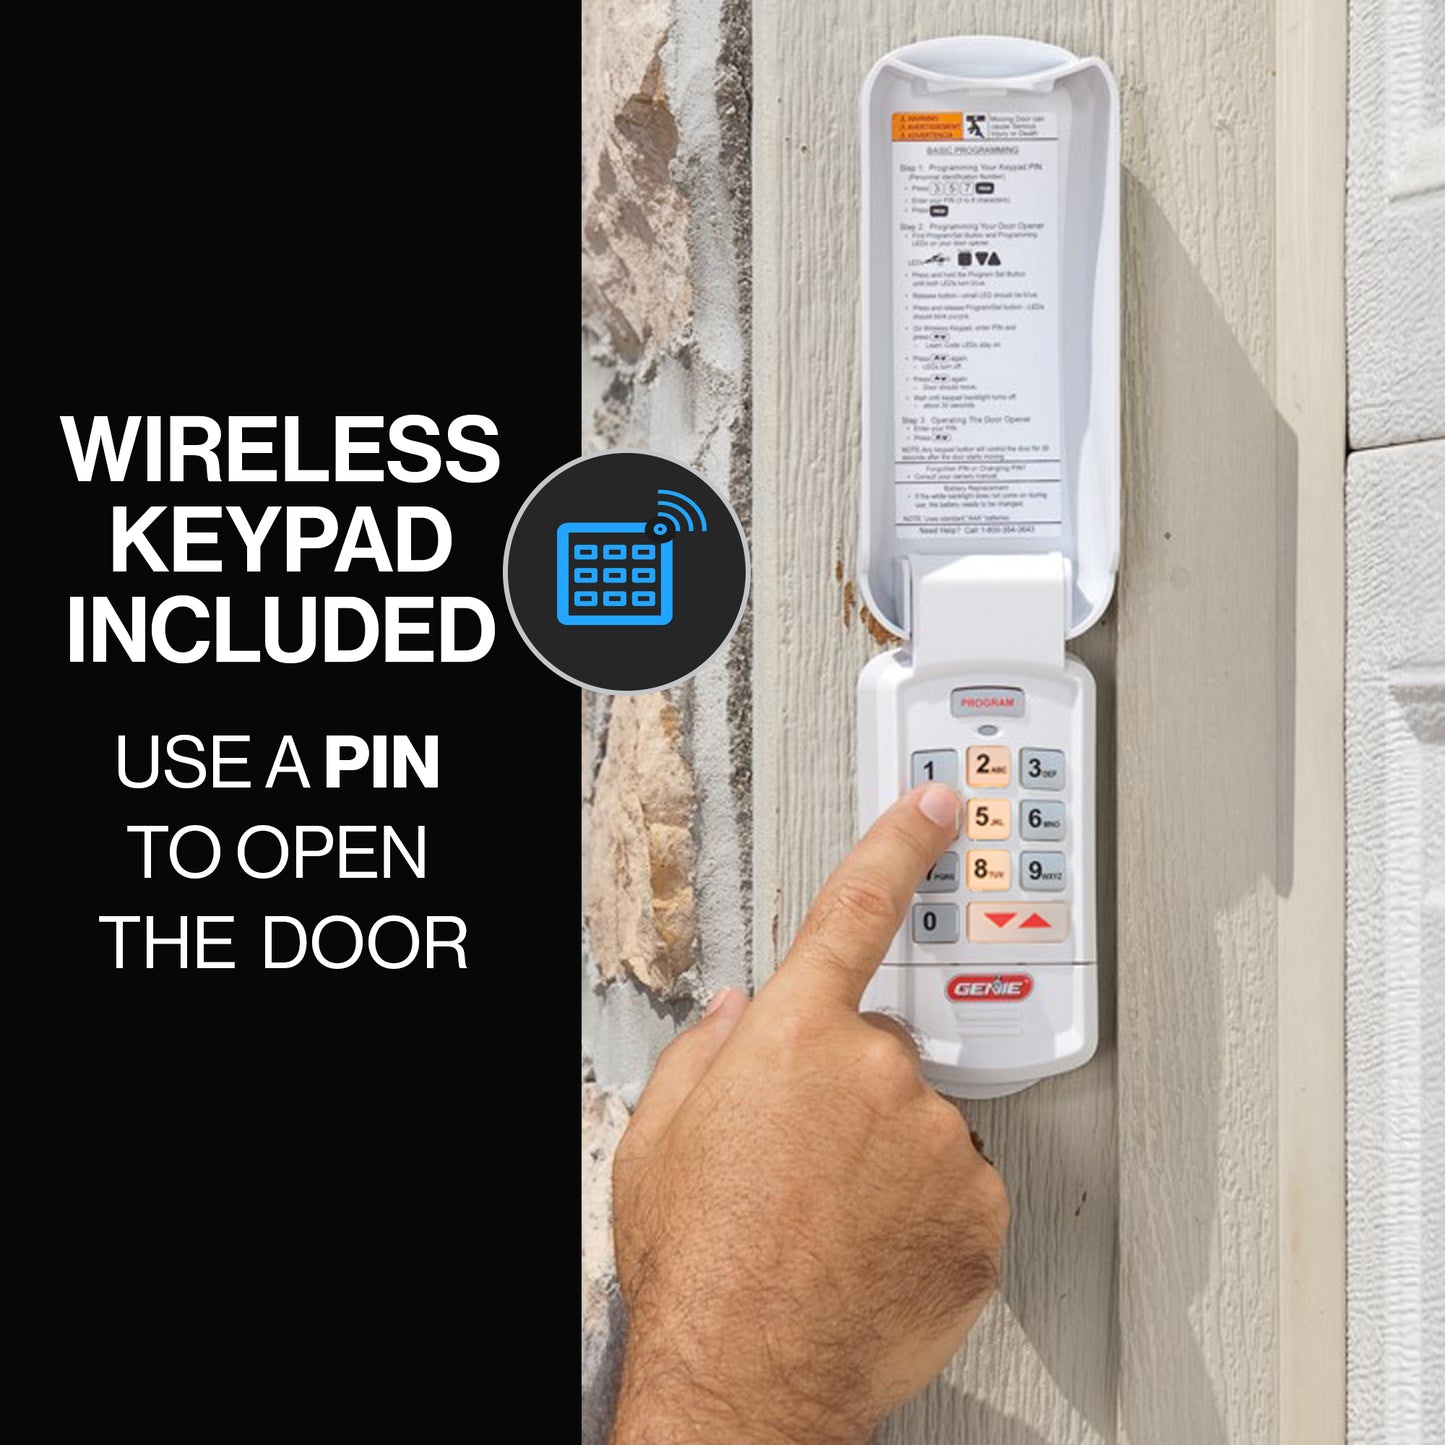 Wireless Keypad included with the Genie ChainMax garage door opener allows you to use a pin to open the garage door